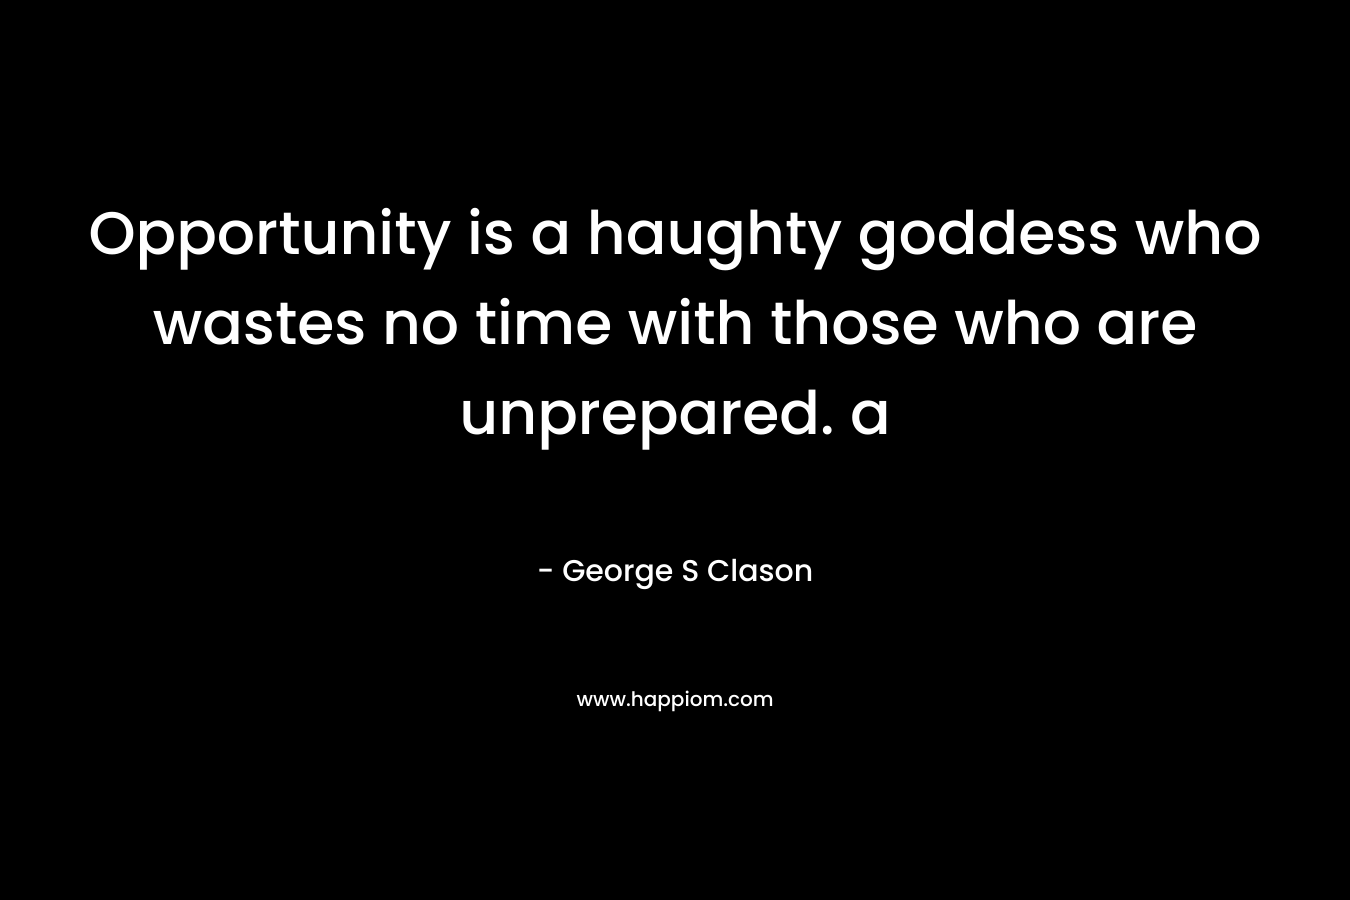 Opportunity is a haughty goddess who wastes no time with those who are unprepared. a – George S Clason